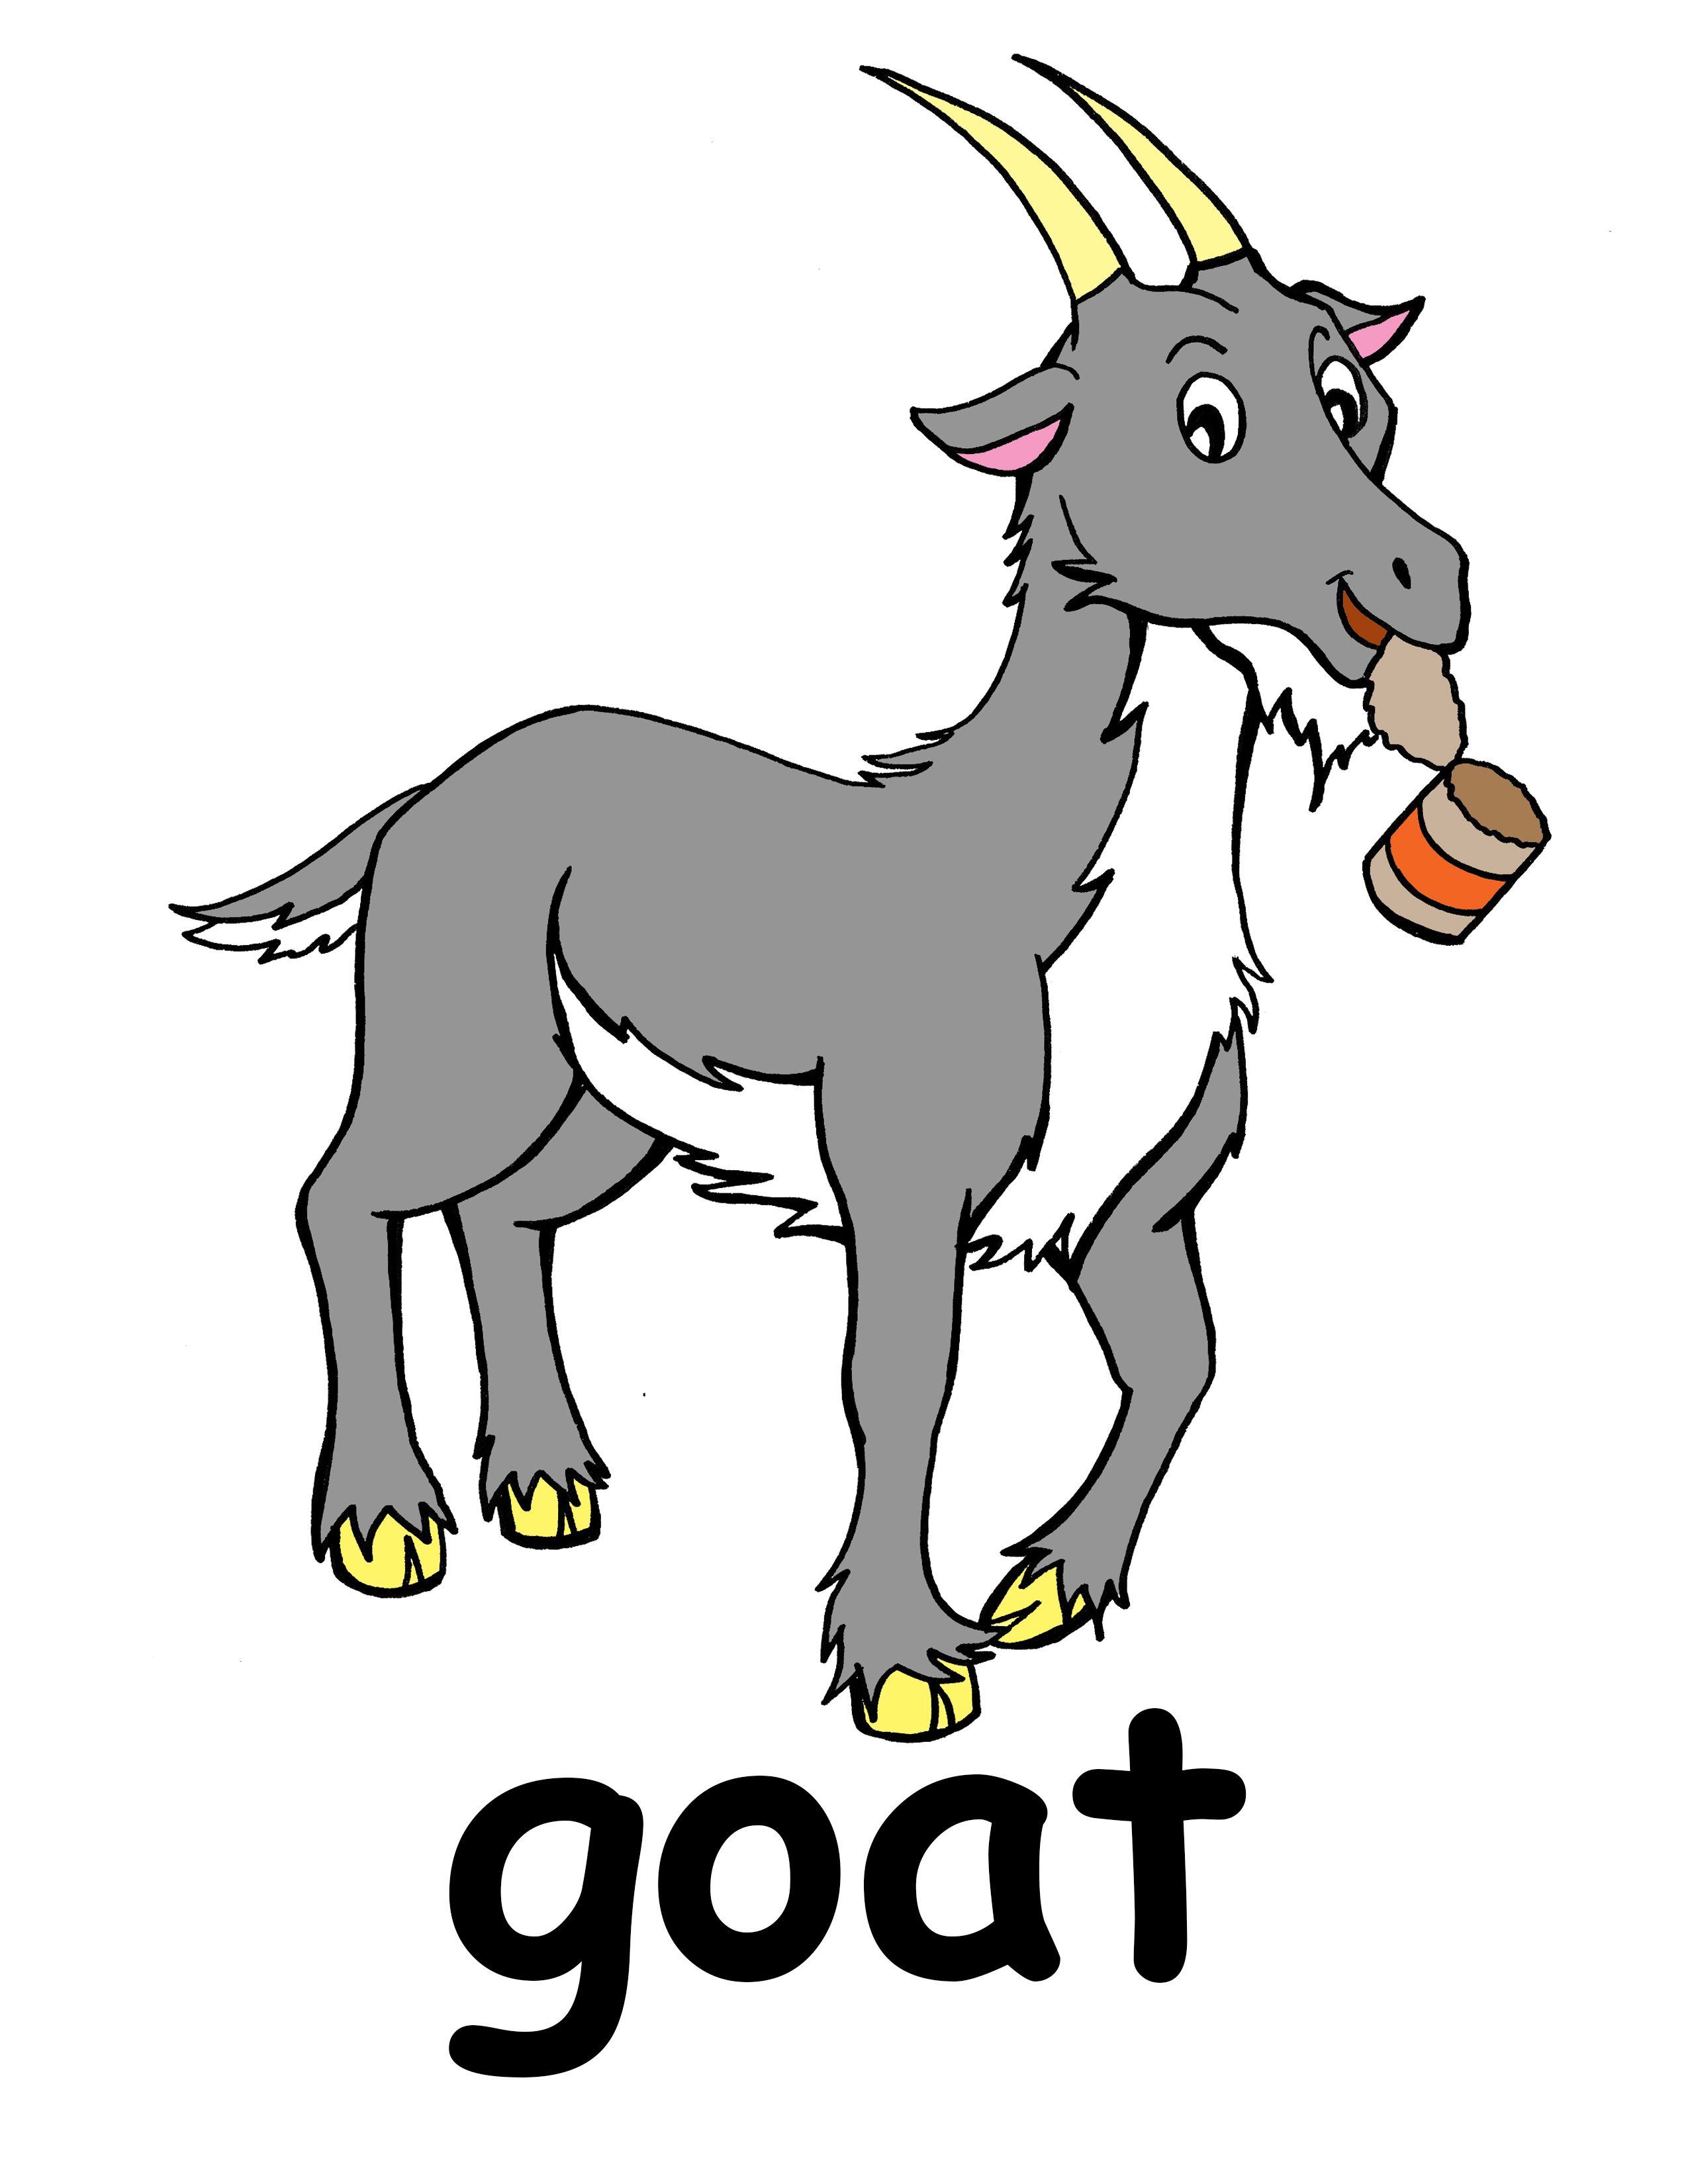 Goat clipart clipart cliparts for you